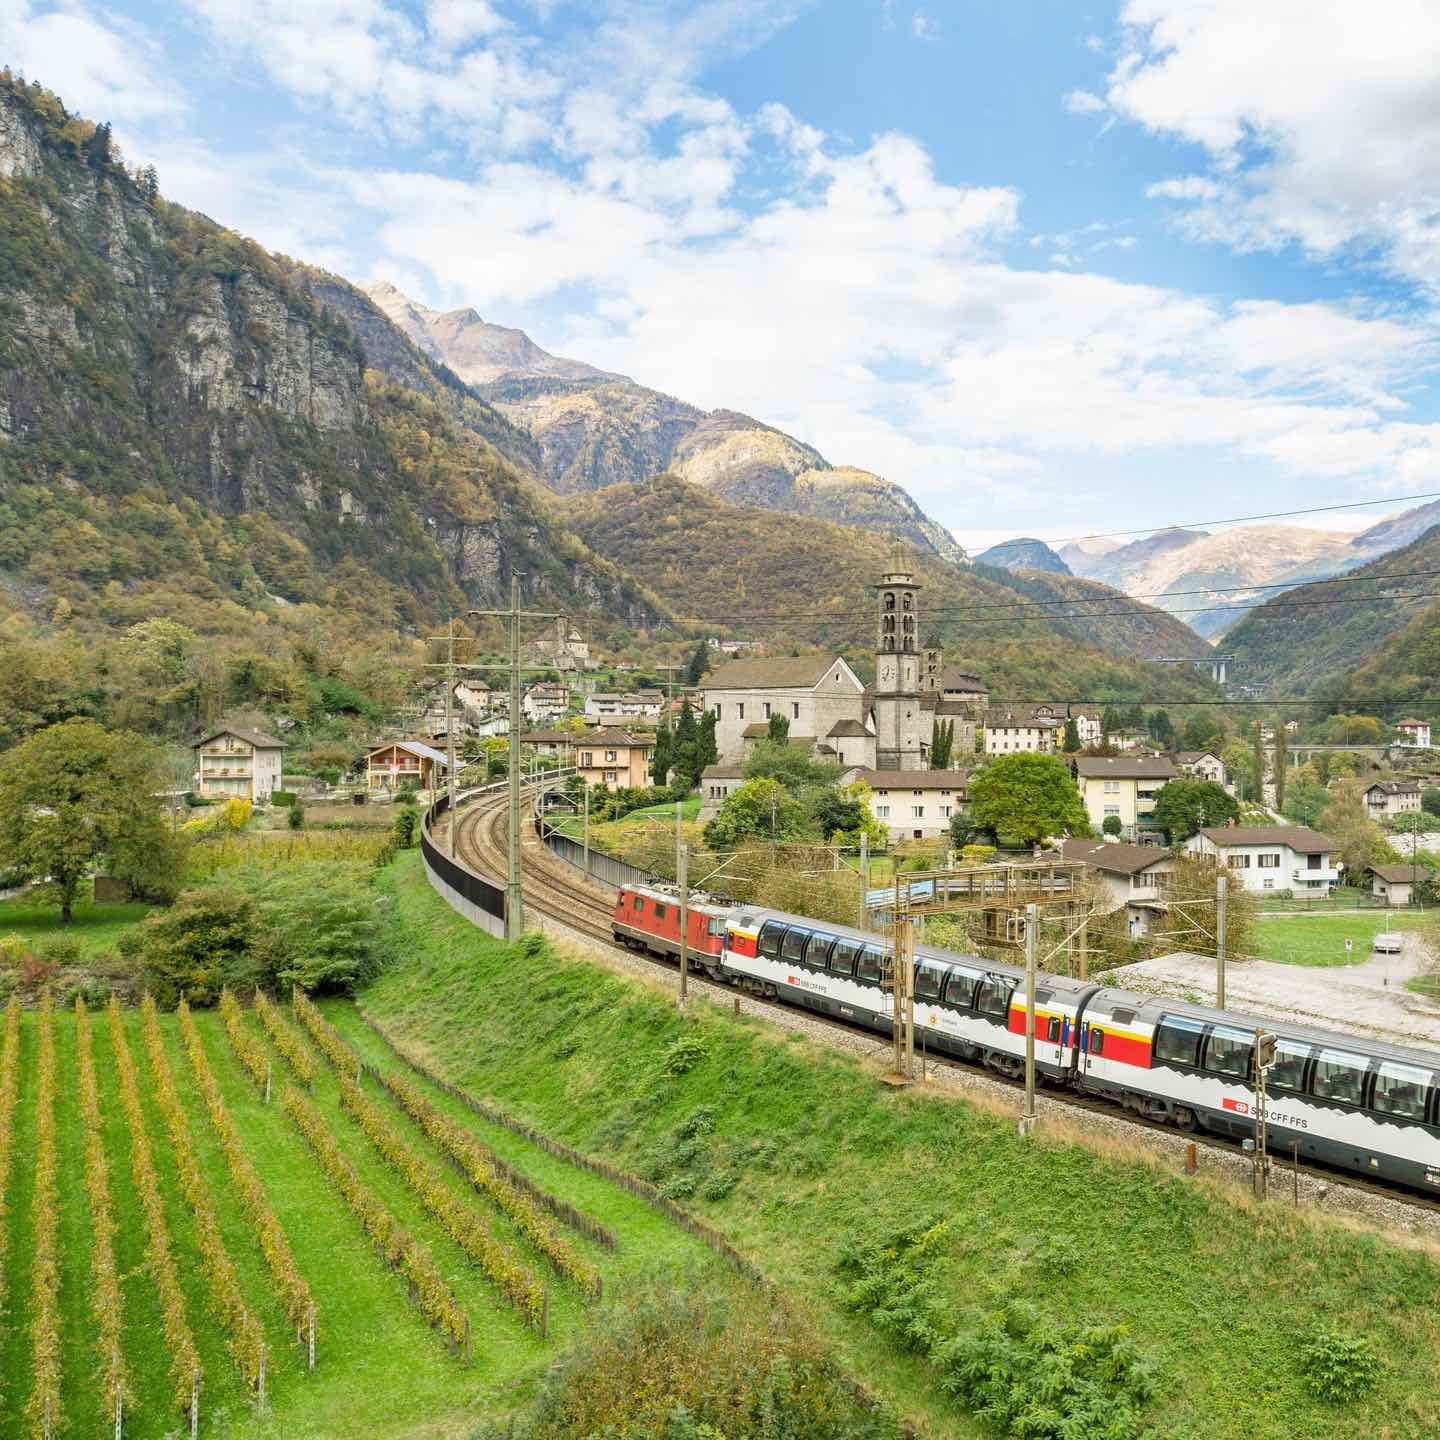 The Gotthard Panorama Express train travelling through town with mountains in background